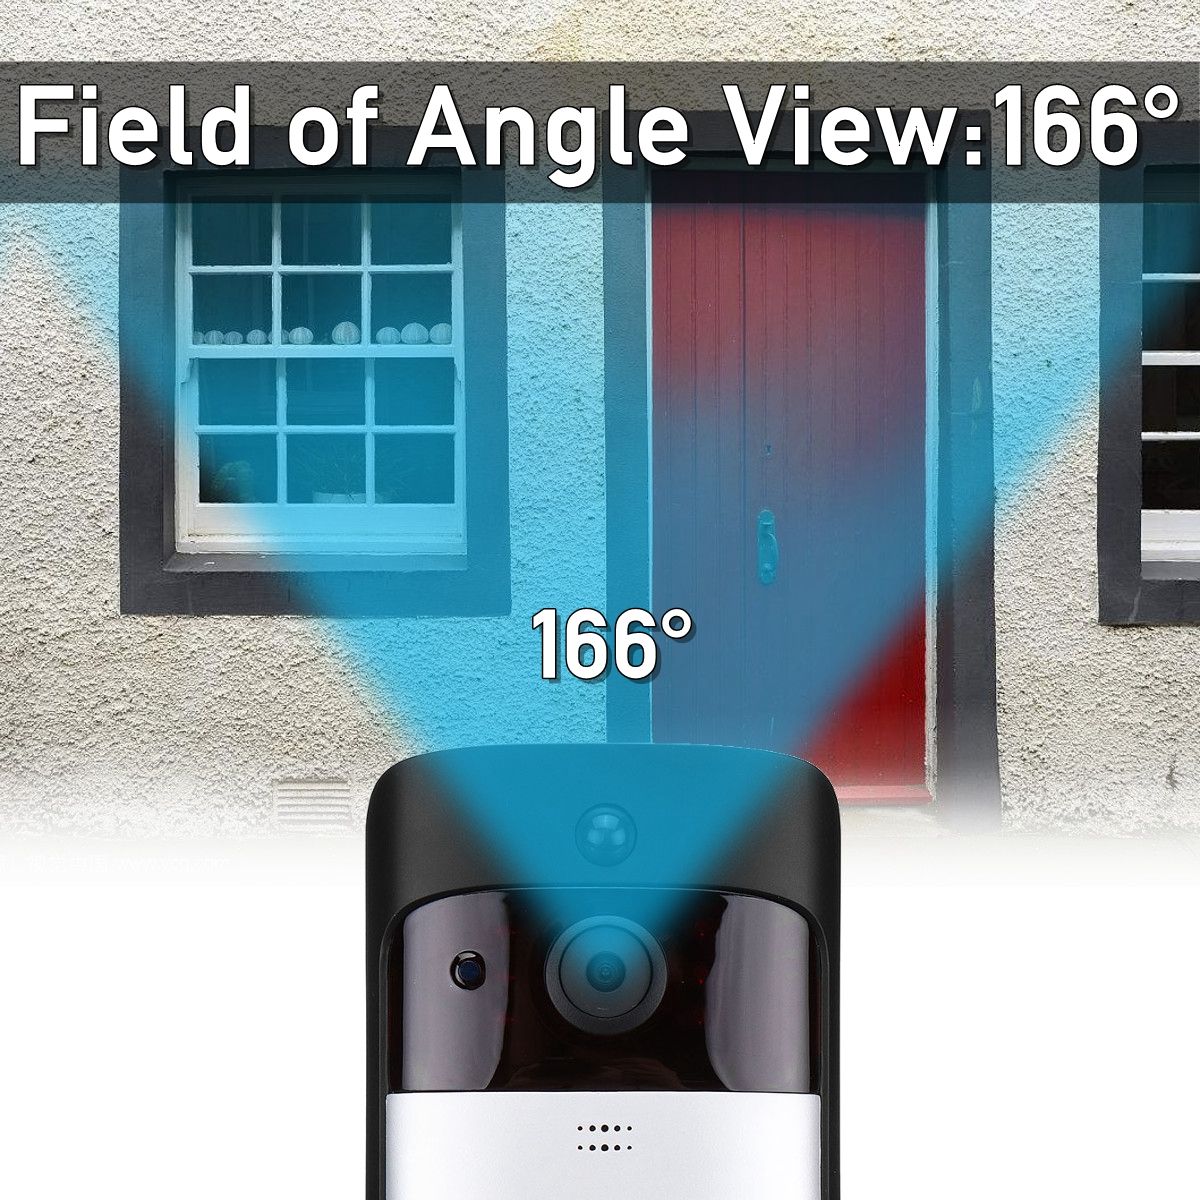 Wireless-1080P-Video-Doorbell-Camera-Battery-Support-PIR-Detect-Night-Vision-with-DingDong-1397726